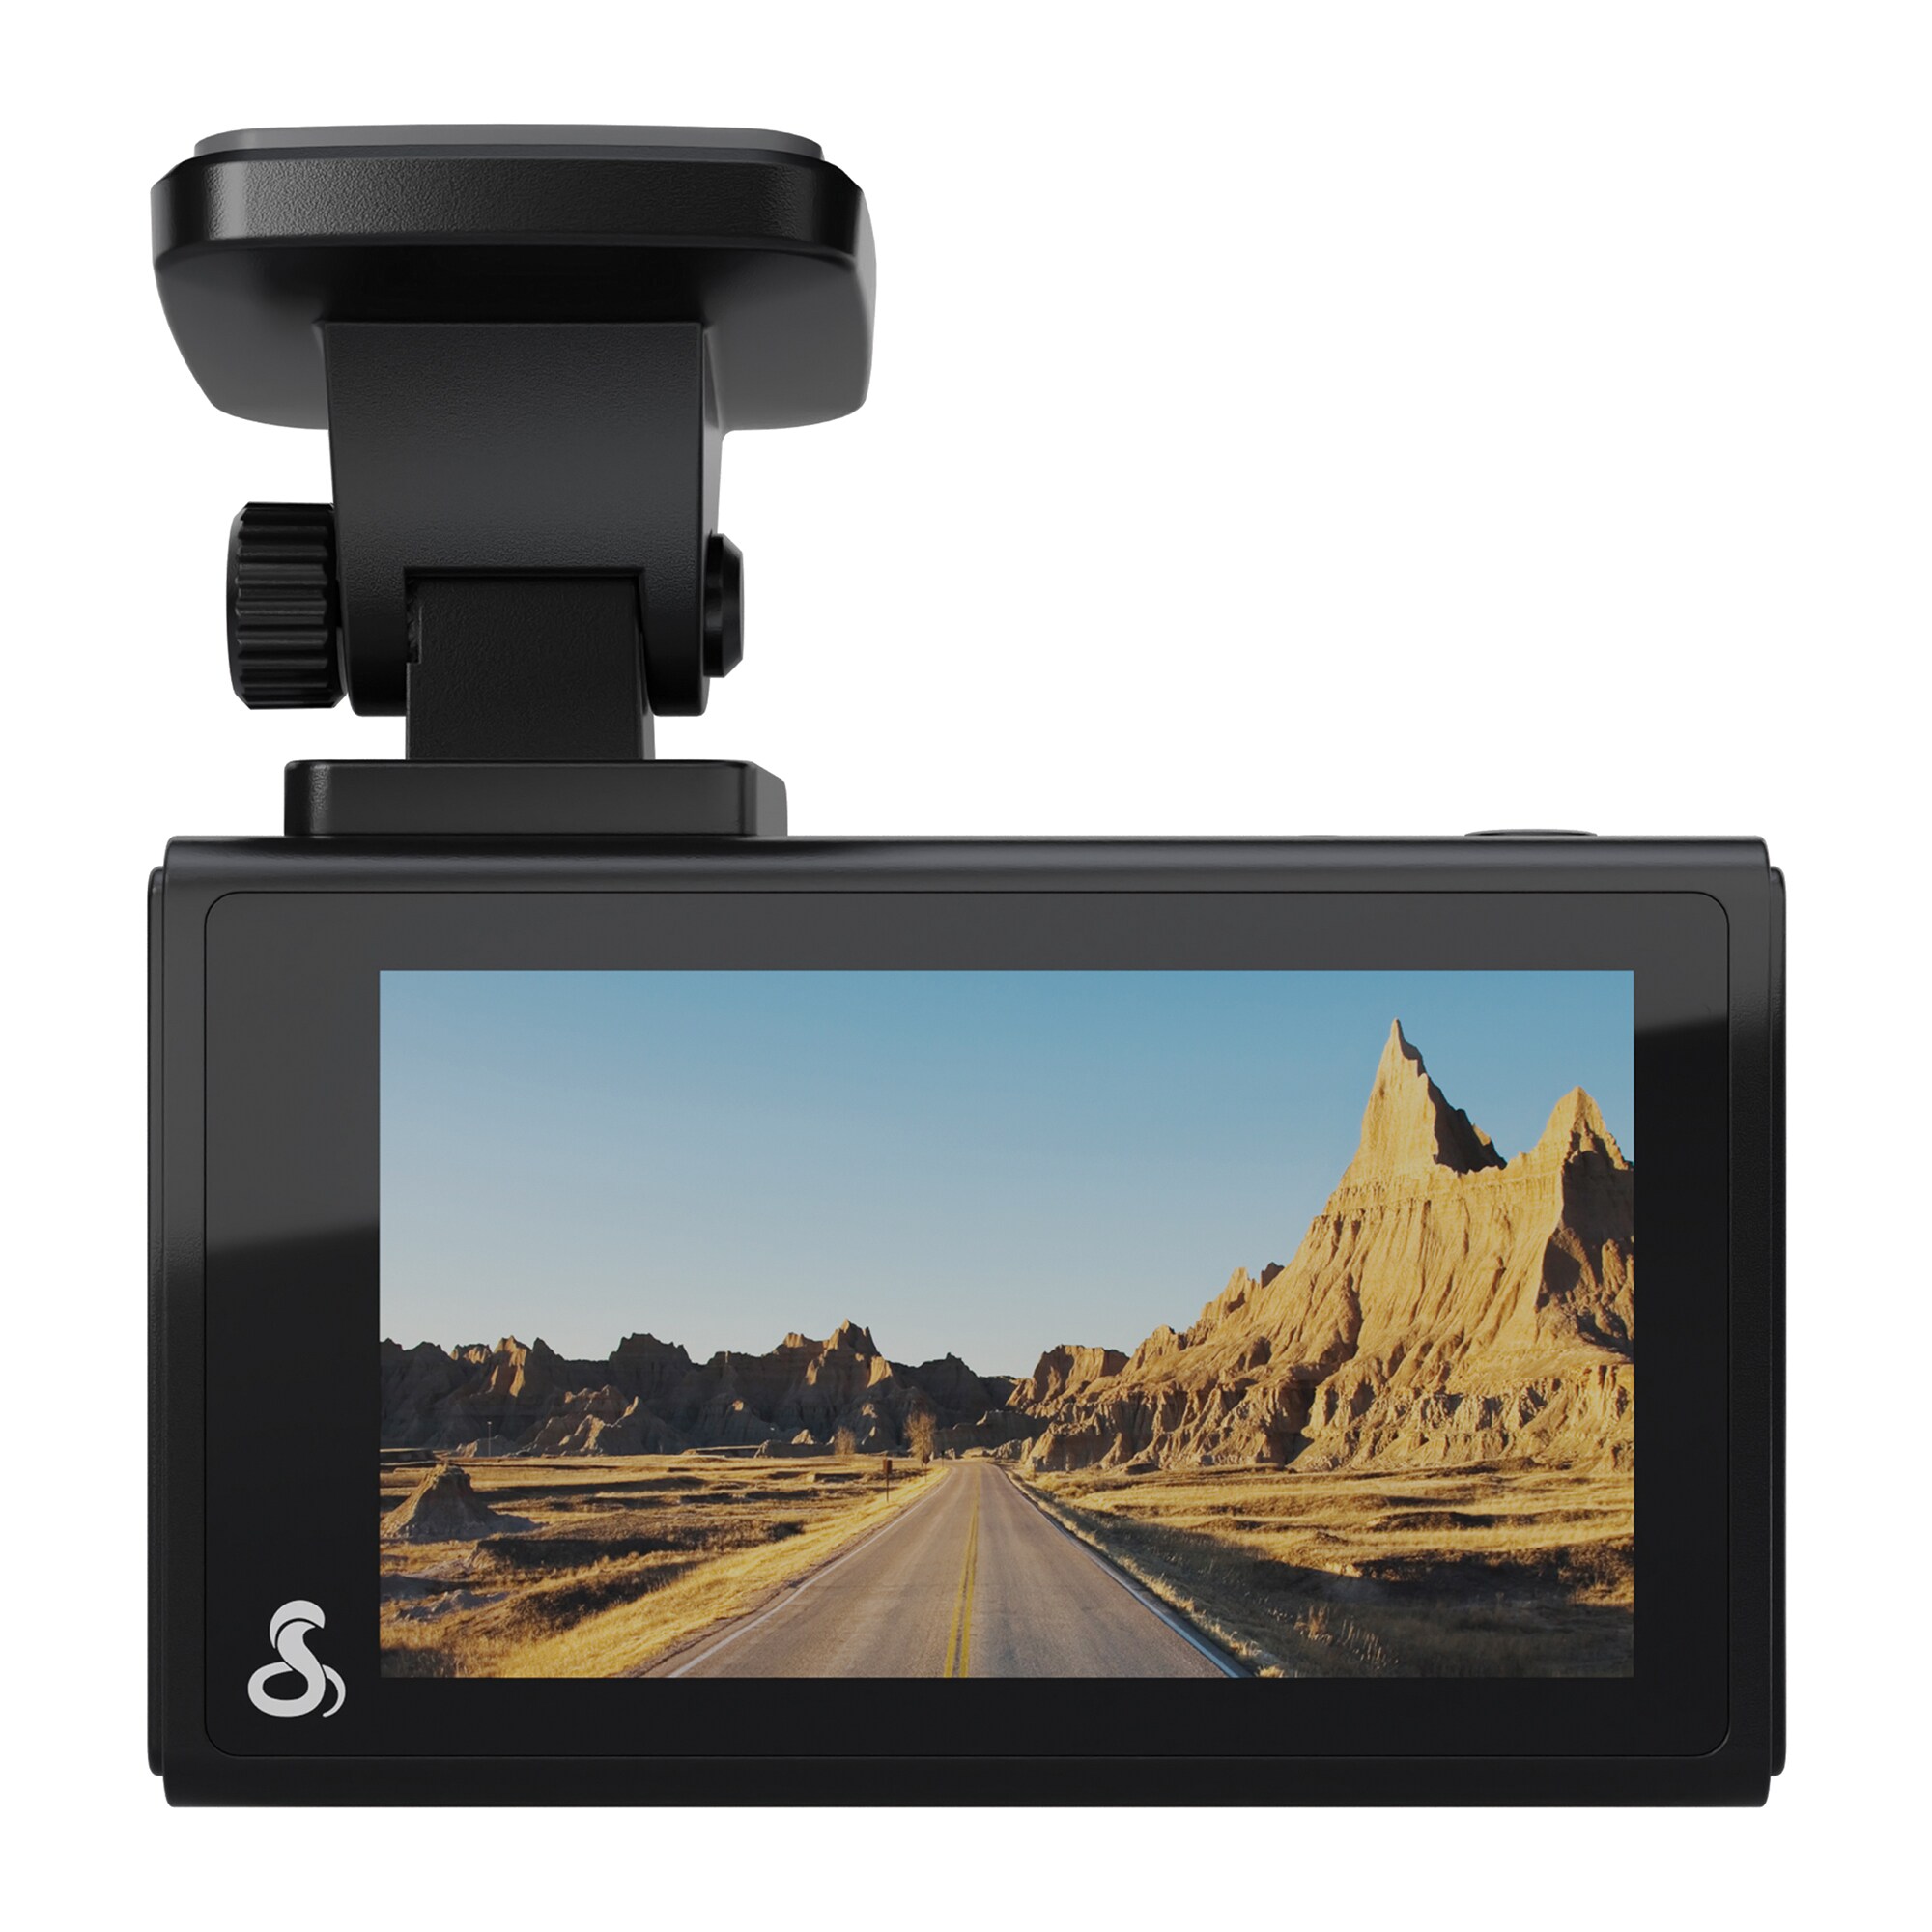 SC 200D Dual-View Smart in the Dash Cams department at Lowes.com